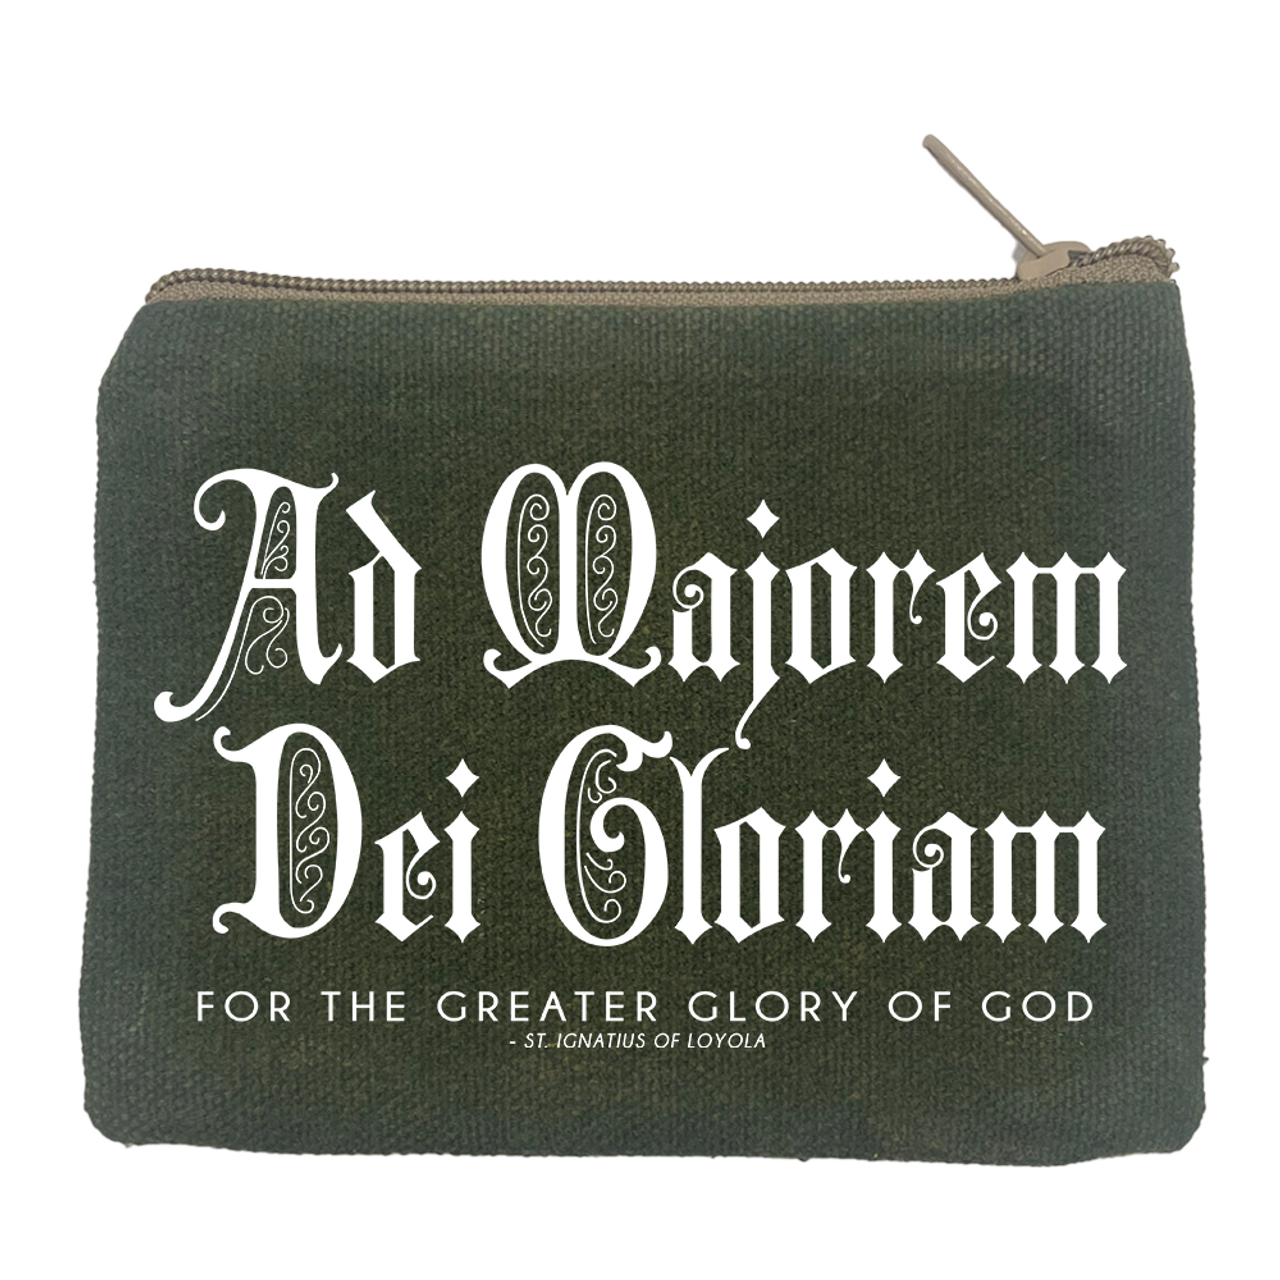 Squeeze Rosary Pouch – The Catholic Gift Store